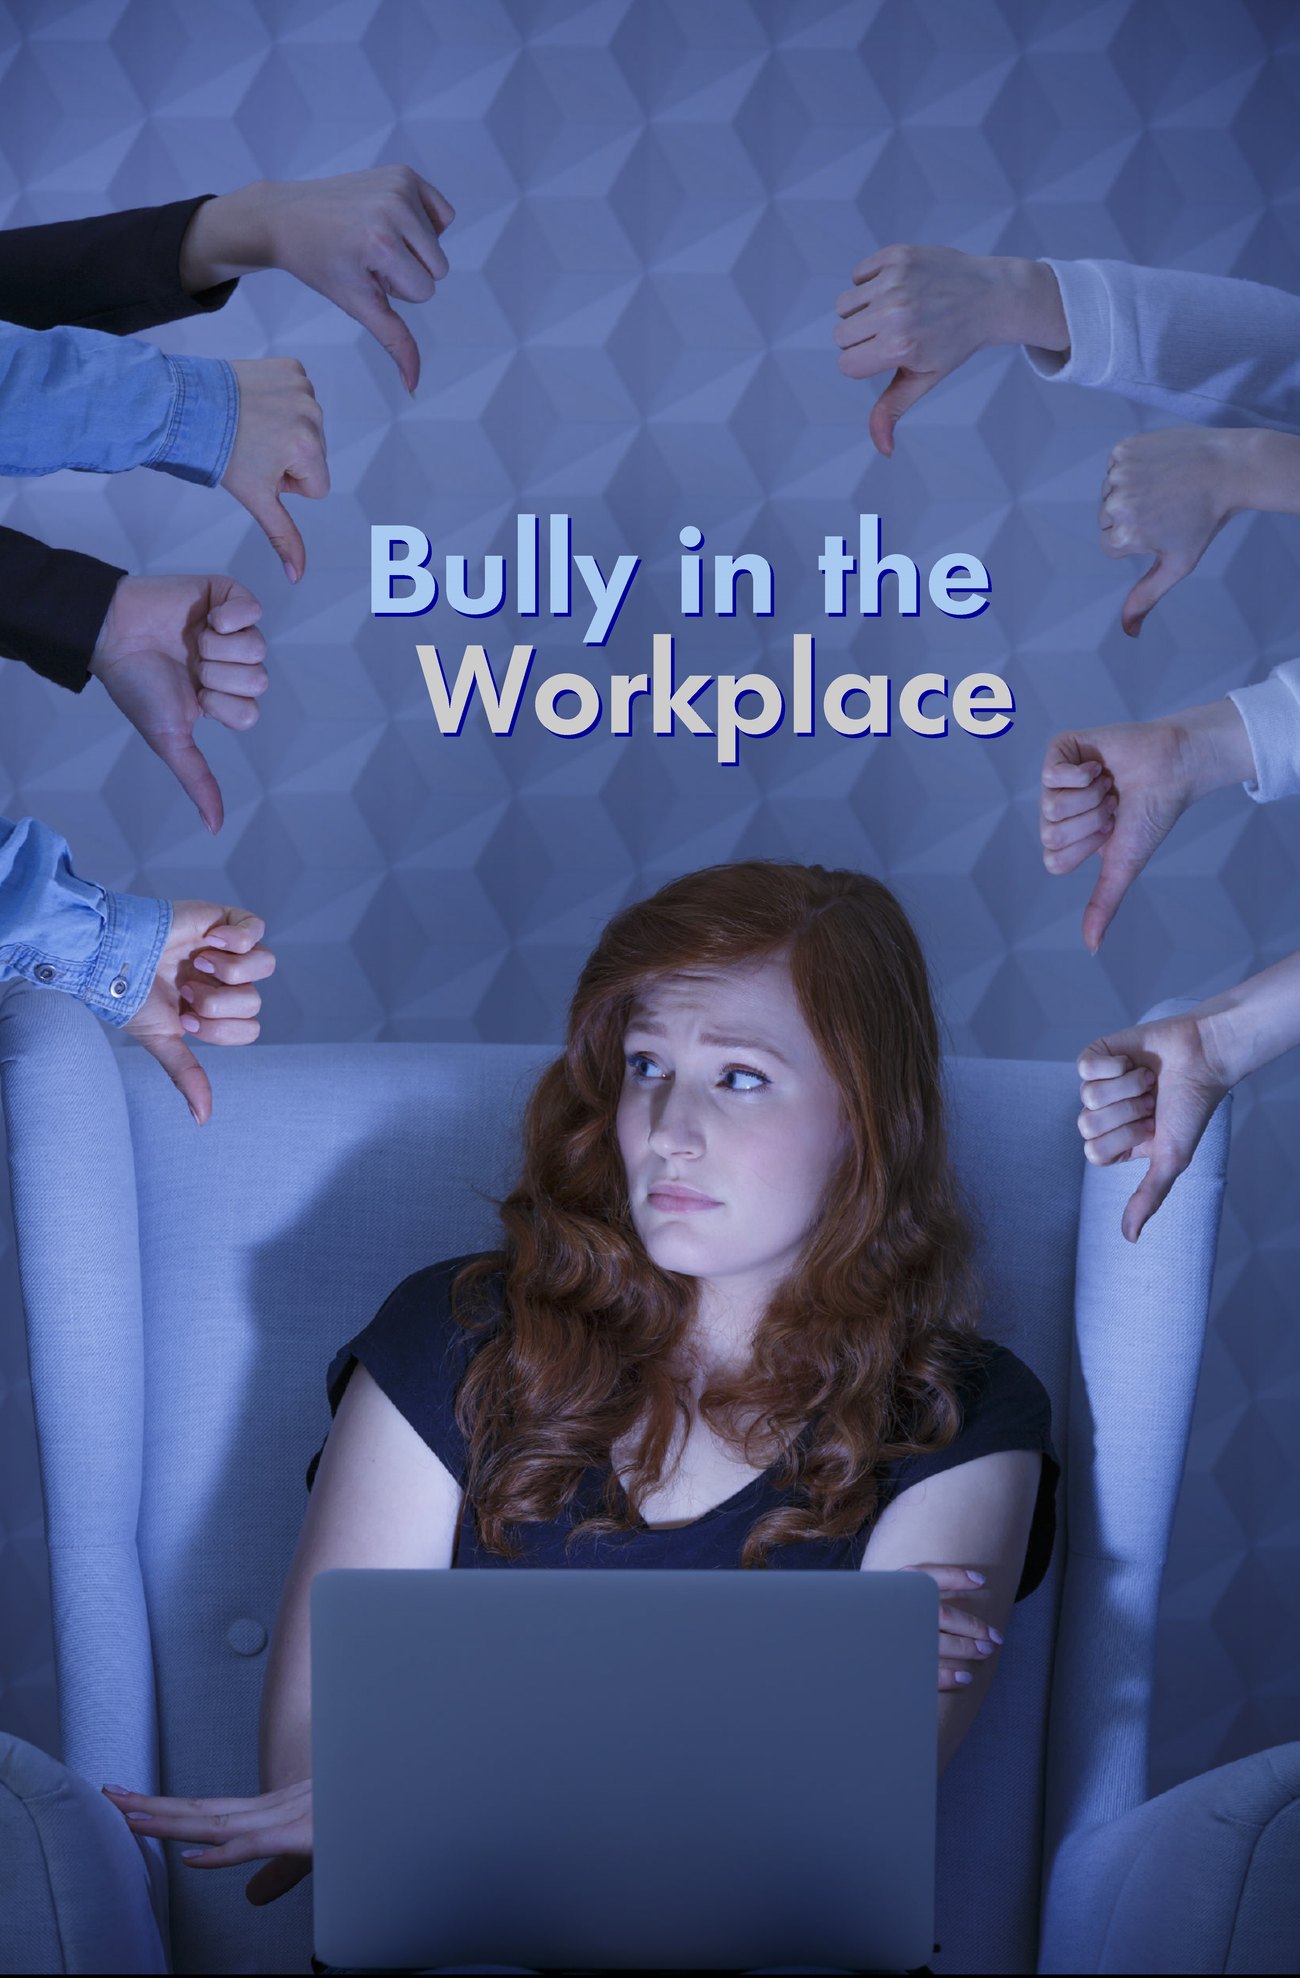 L7048 - Bully in the Workplace